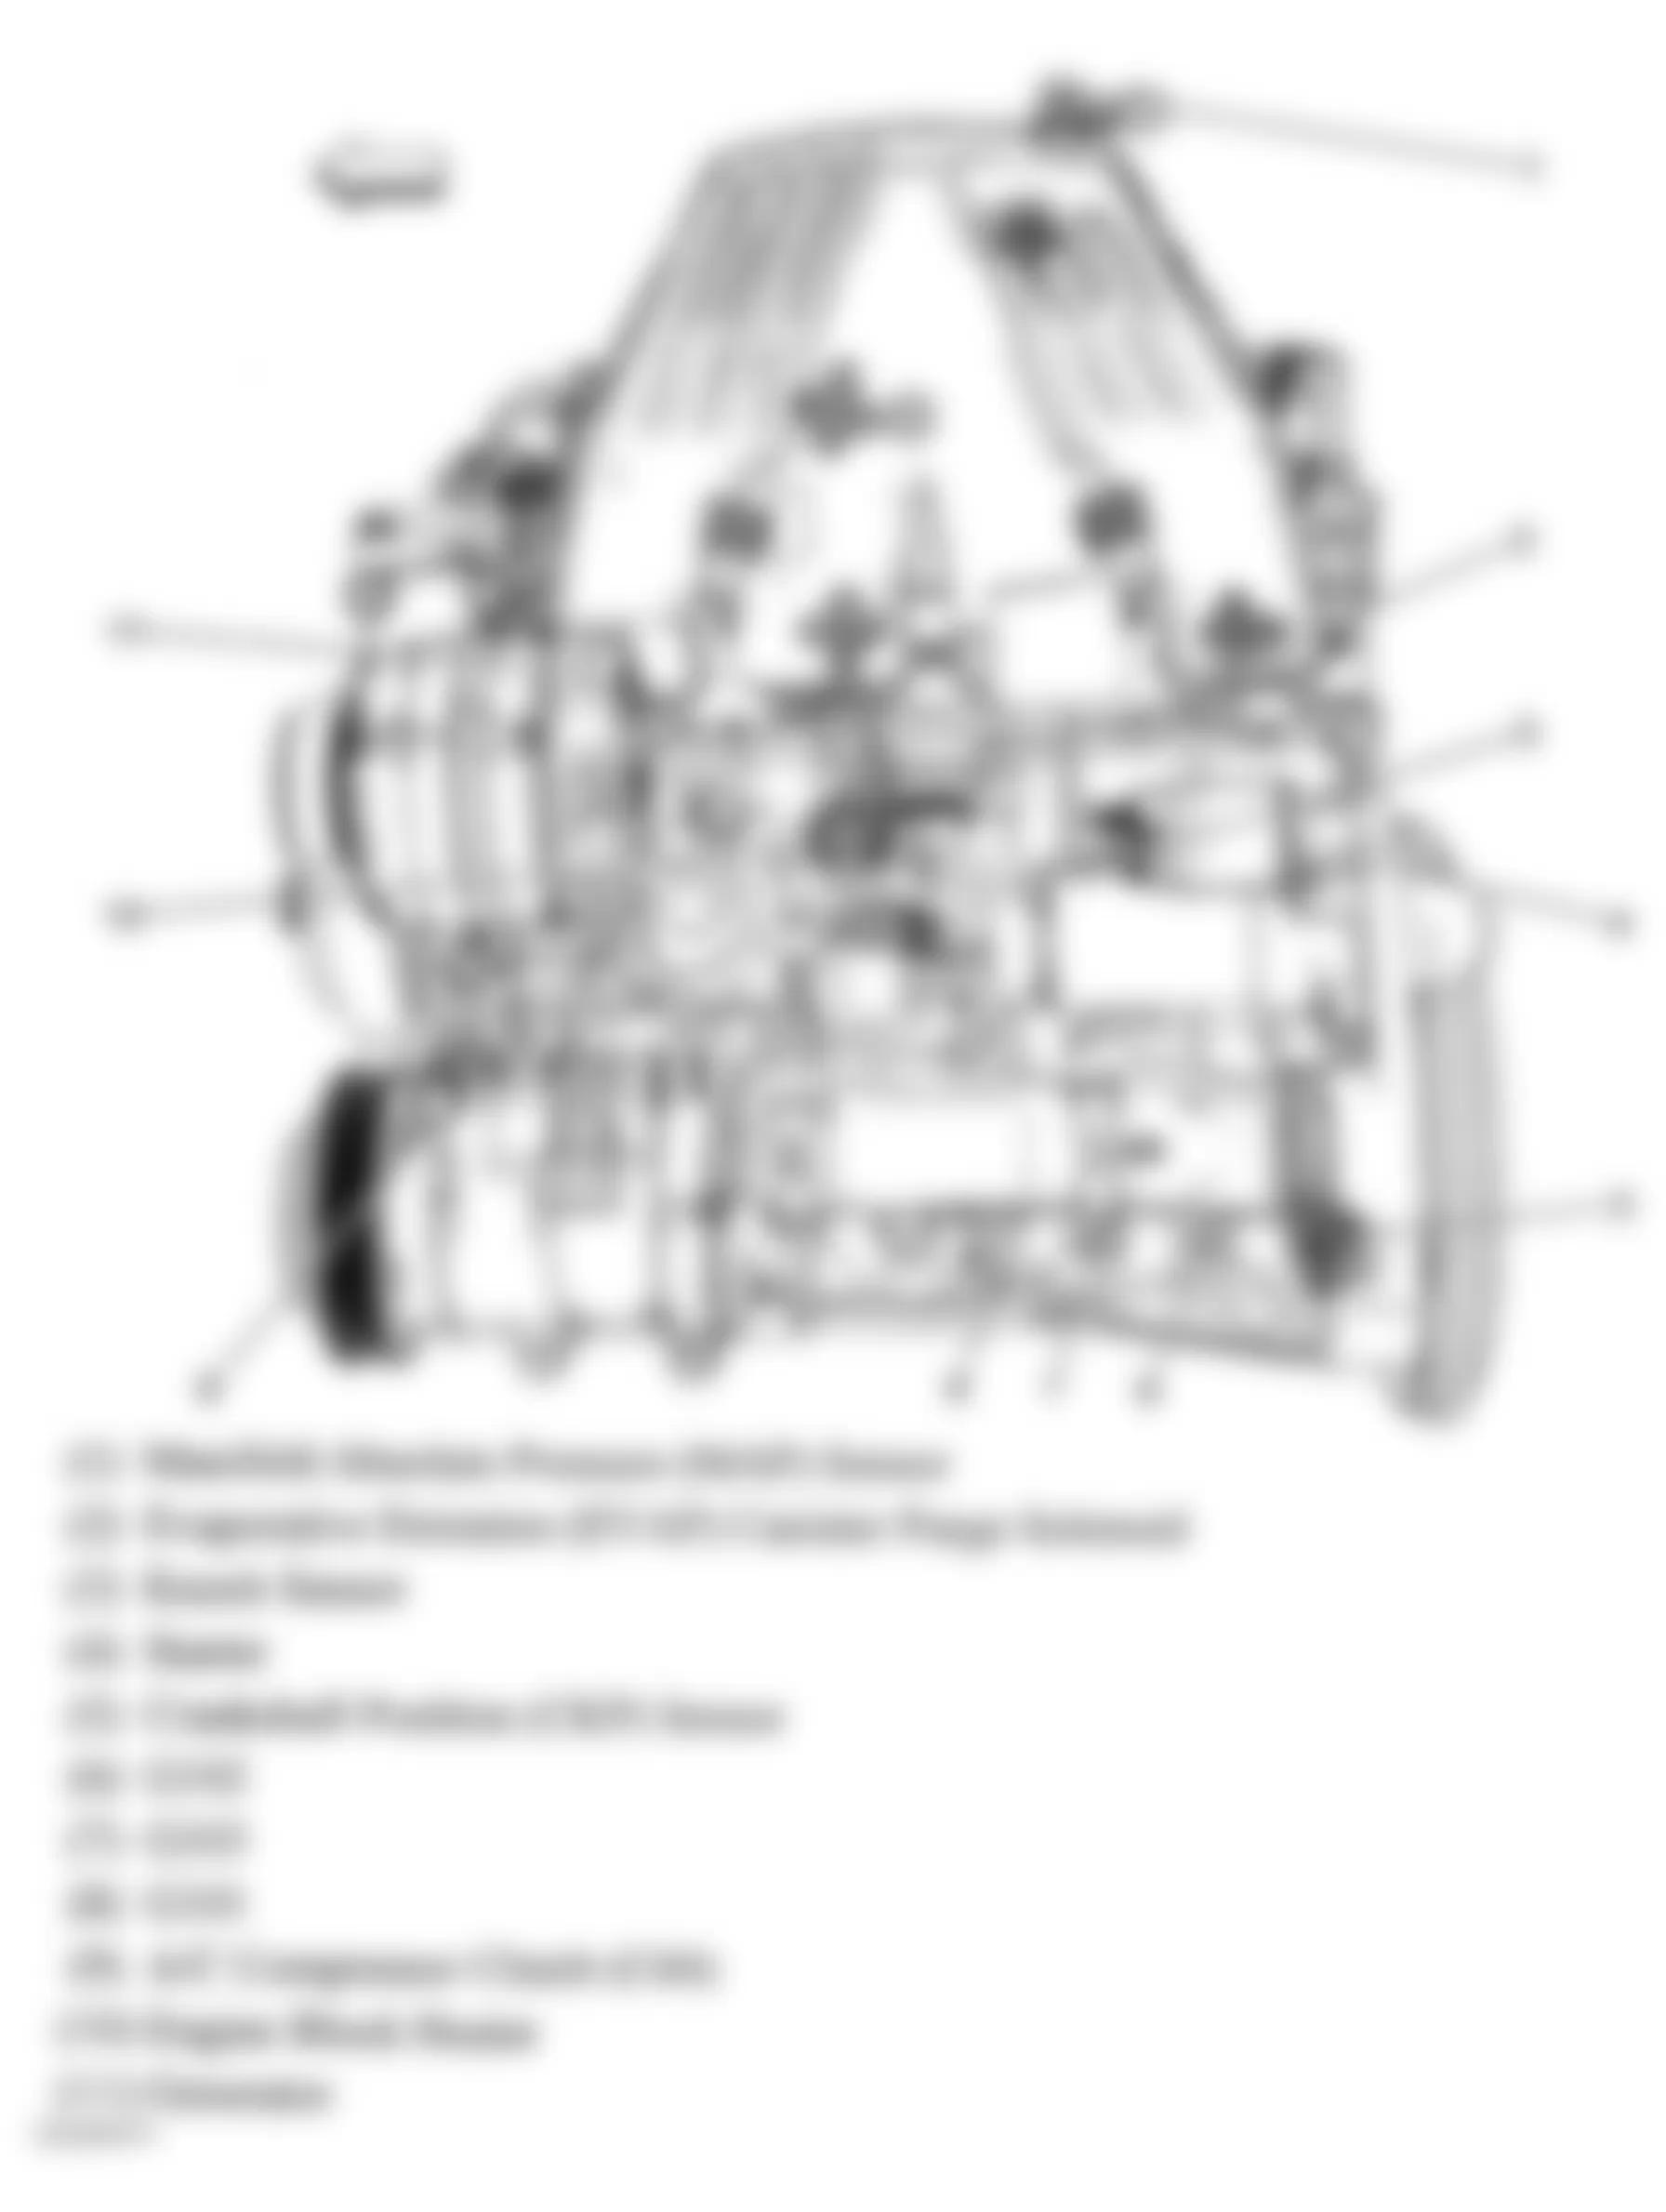 Chevrolet Colorado 2004 - Component Locations -  Top View Of Engine